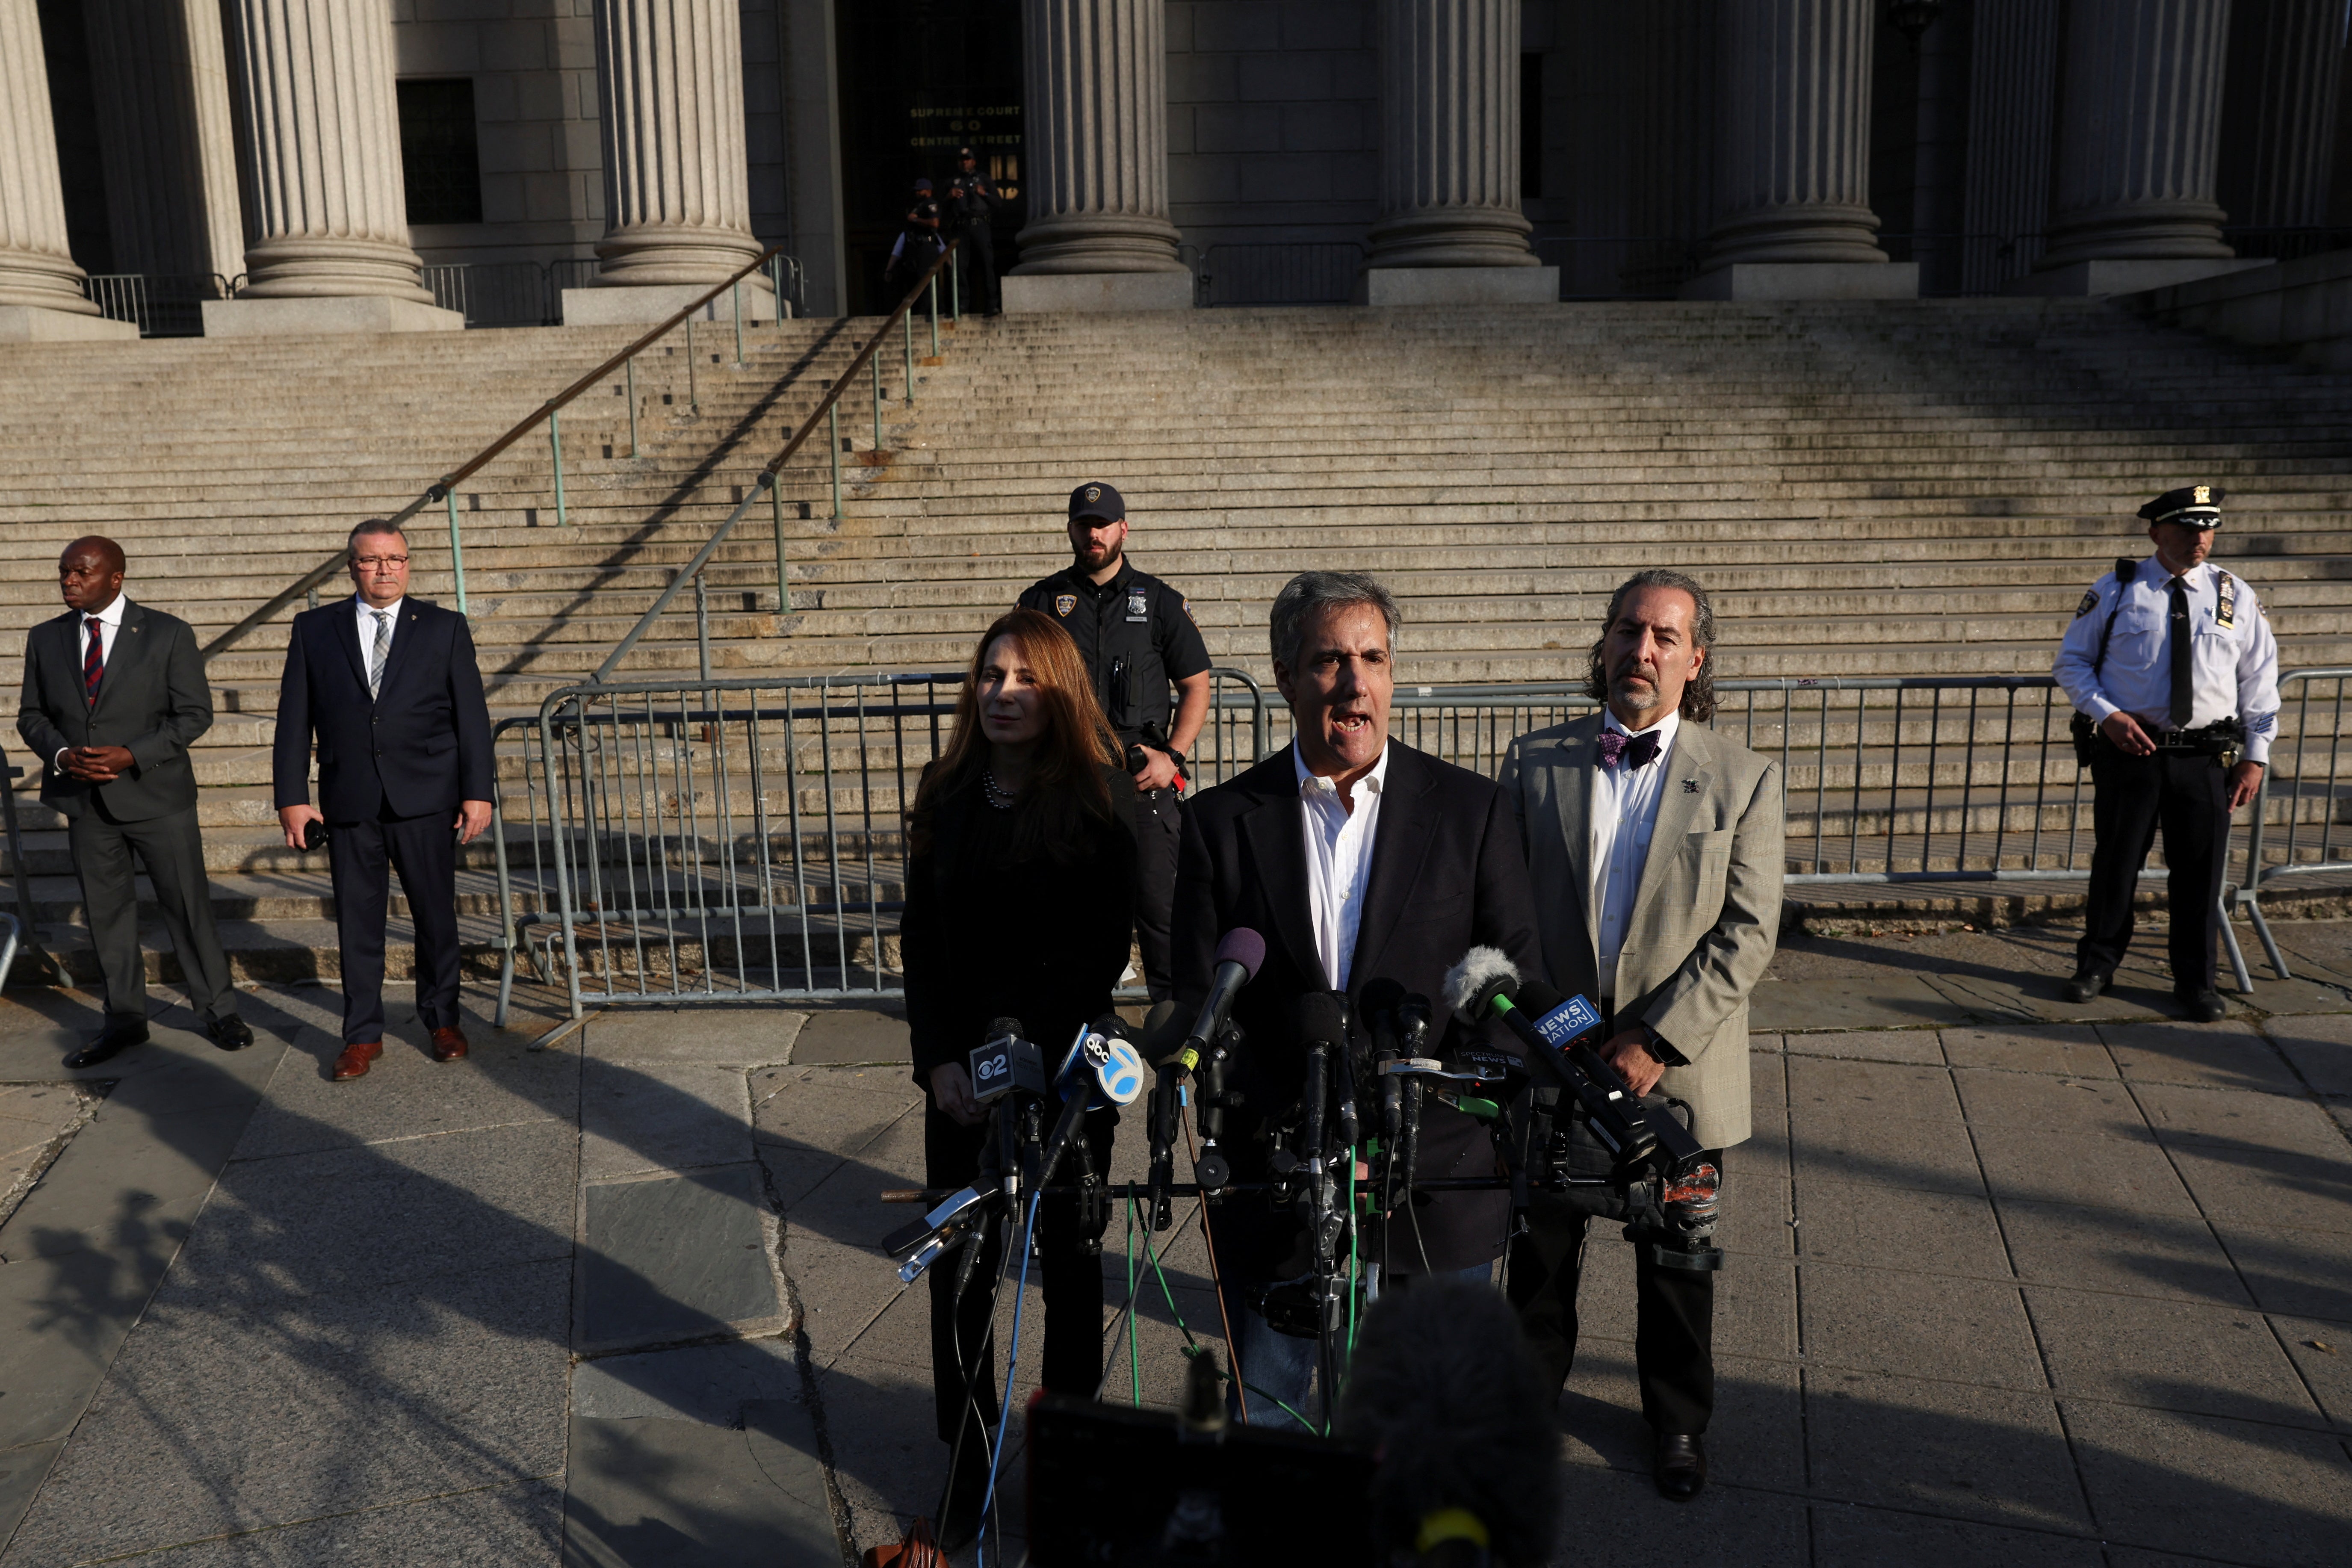 Michael Cohen speaks to reporters after two days of testimony in Donald Trump’s civil fraud trial in New York Supreme Court on 25 October.